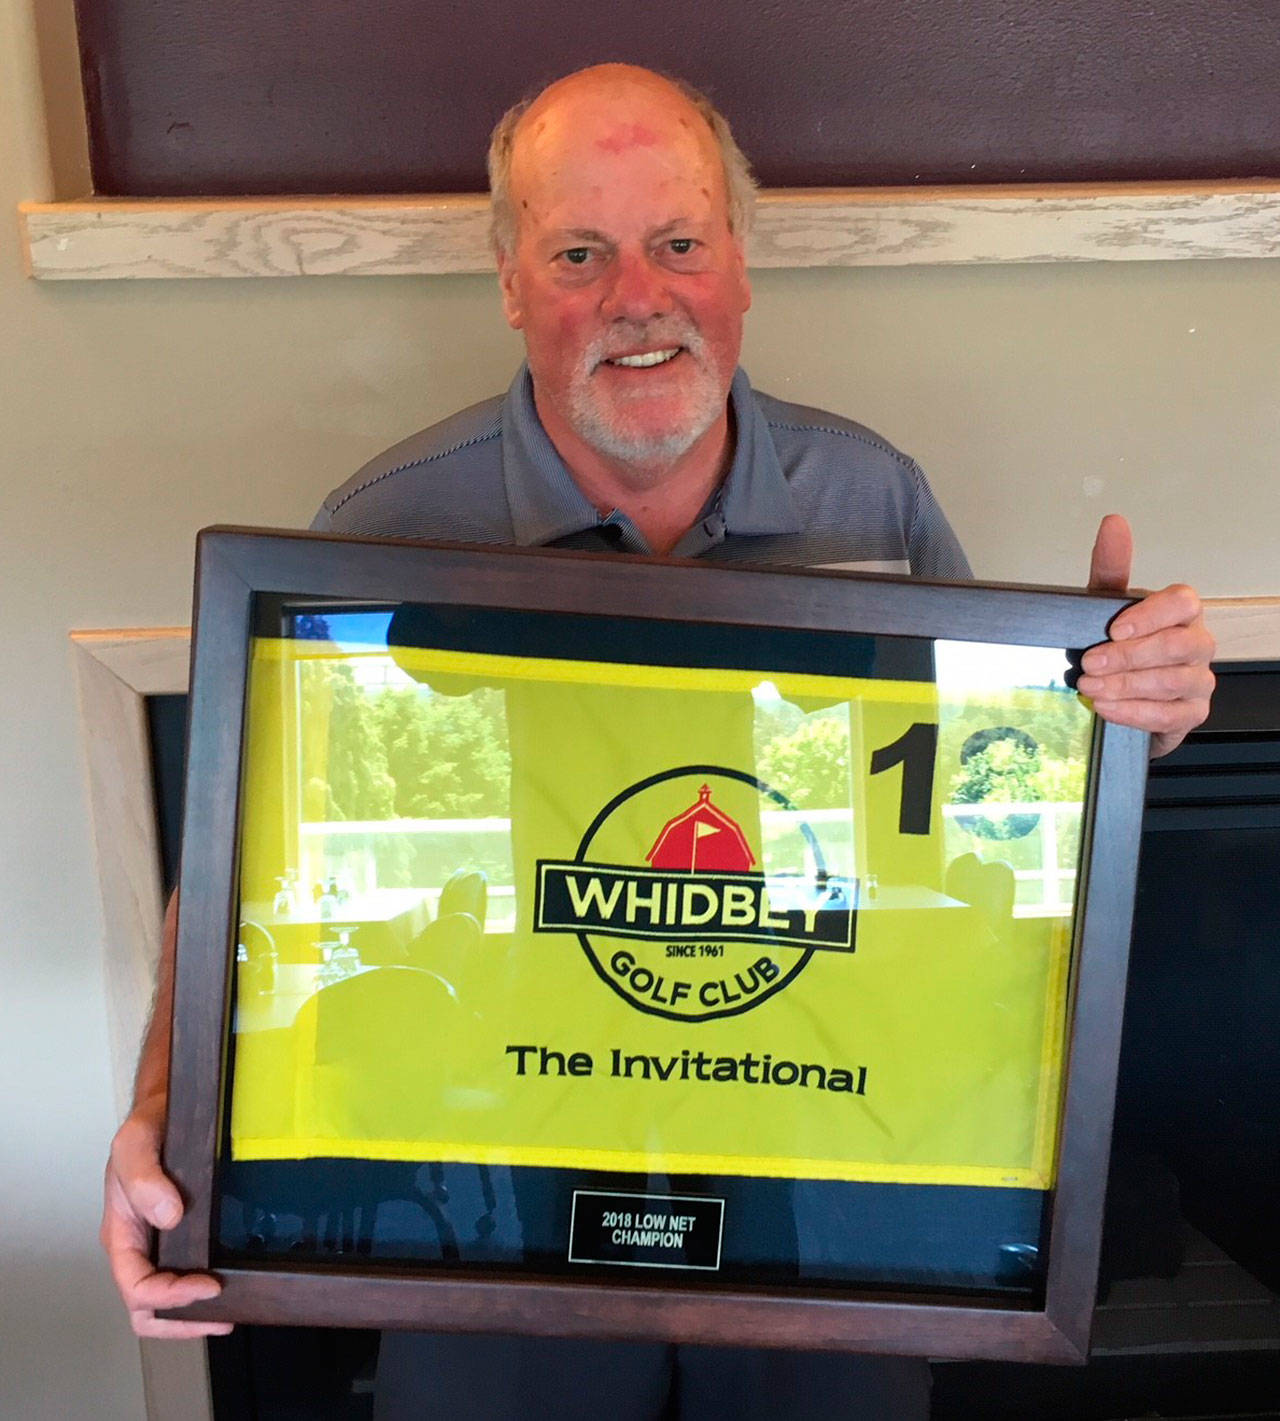 Doug Geffe was the winner of the 2018 Mountain Mist Whidbey Golf Club Men’s Invitational. (Photo courtesy of David Phay)